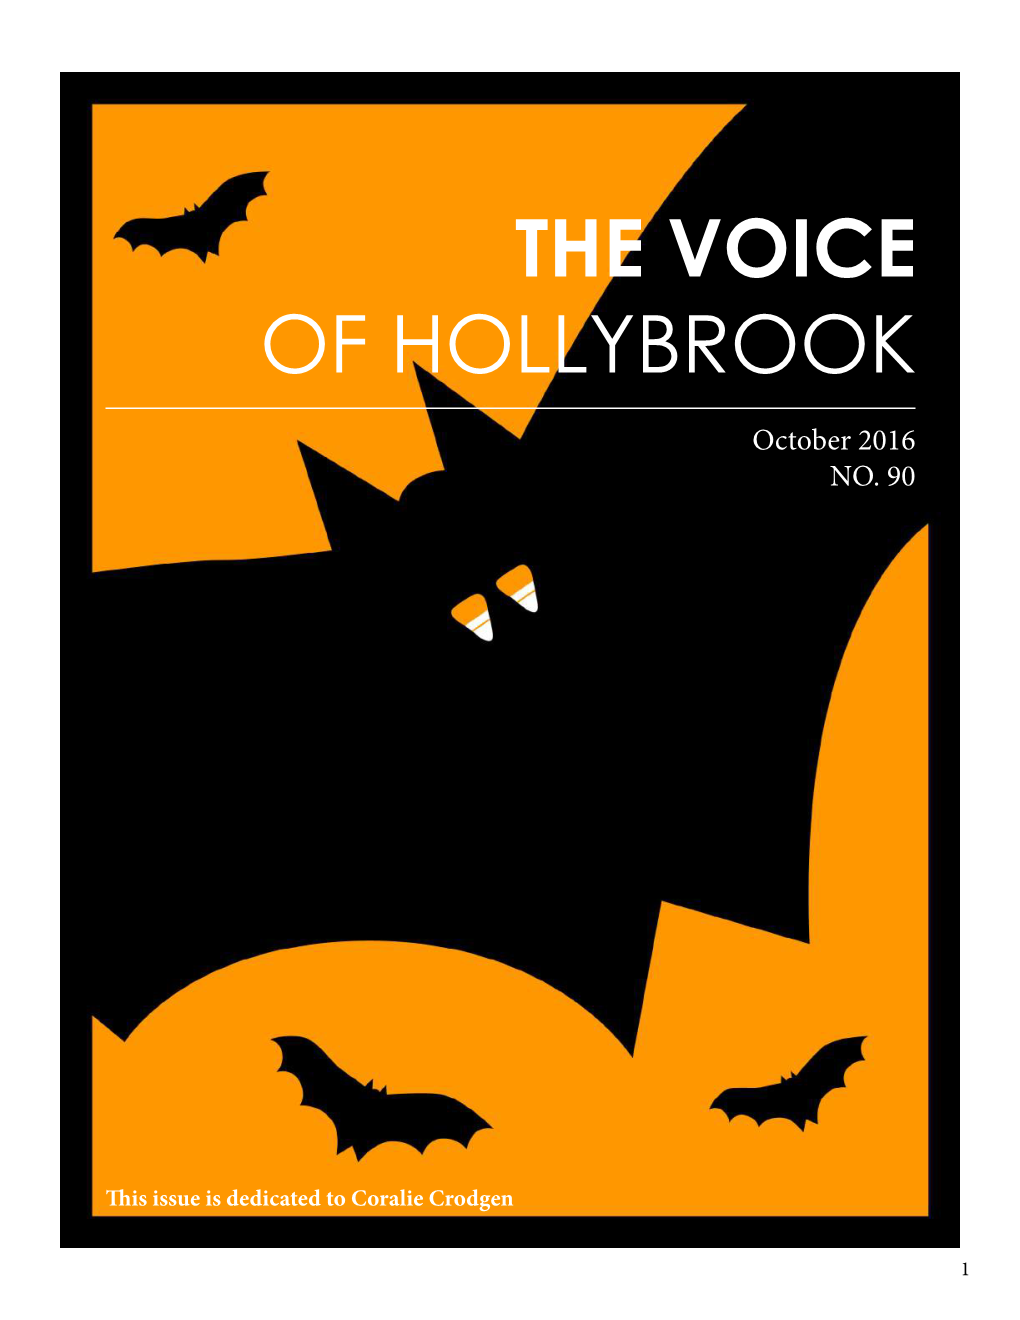 The Voice of Hollybrook